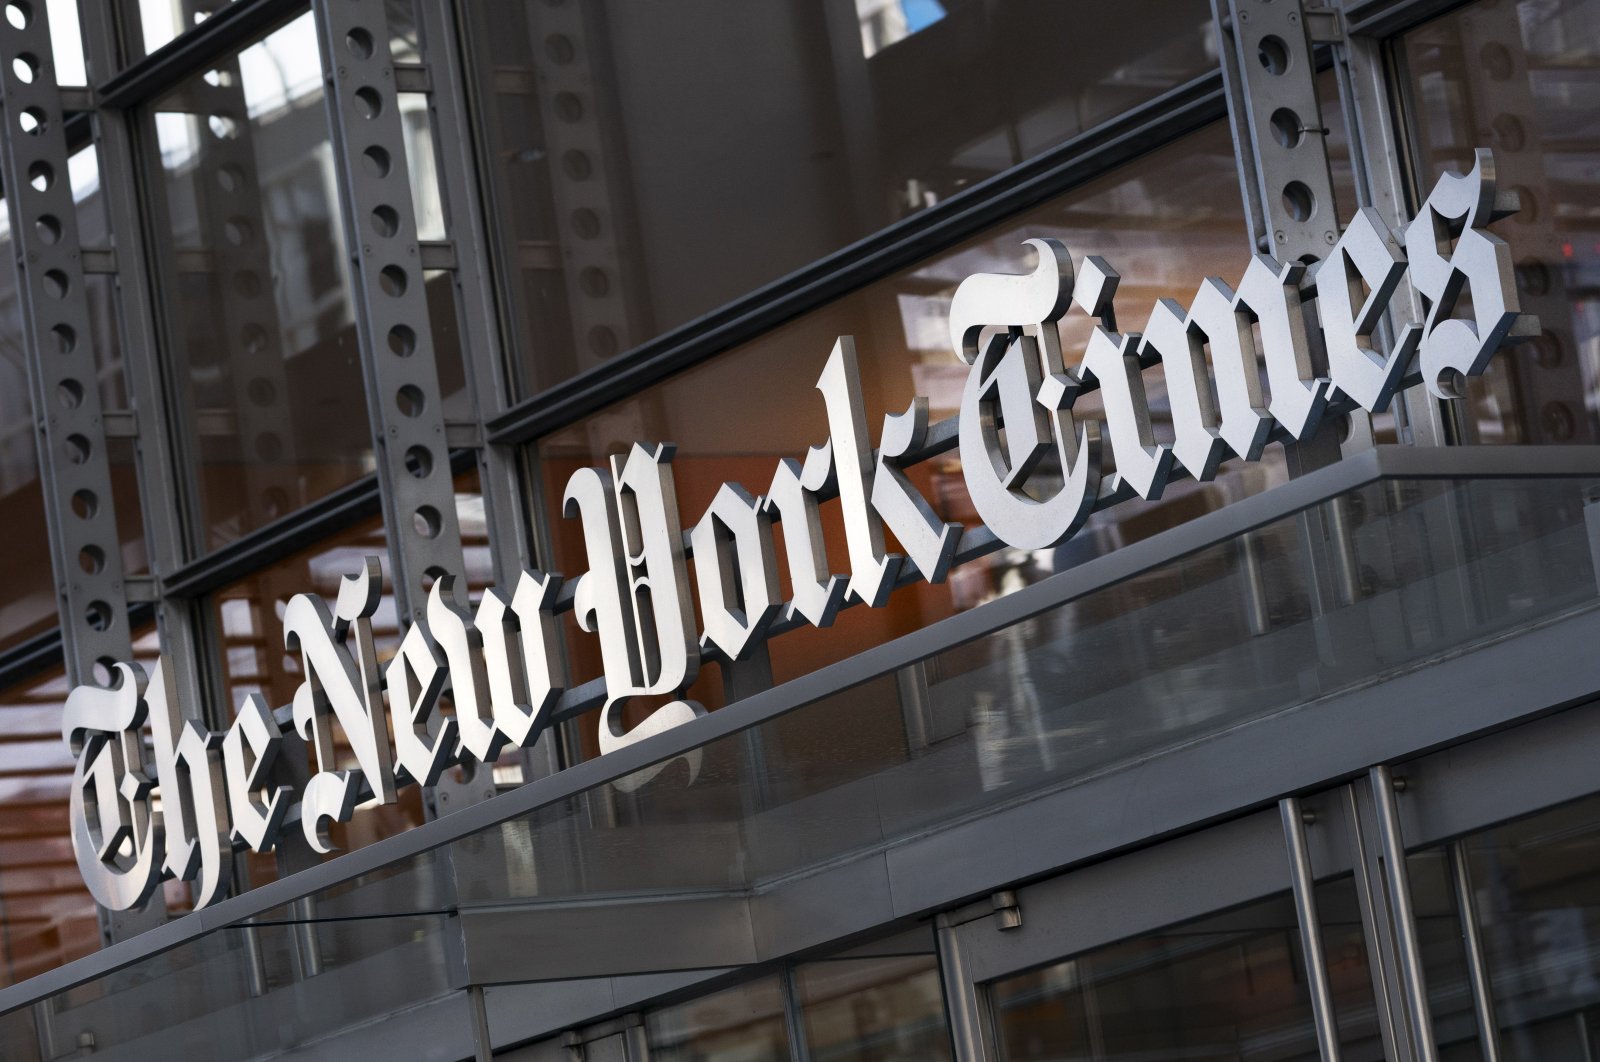 A sign for The New York Times hangs above the entrance to its building, New York City, U.S., May 6, 2021. (AP Photo)